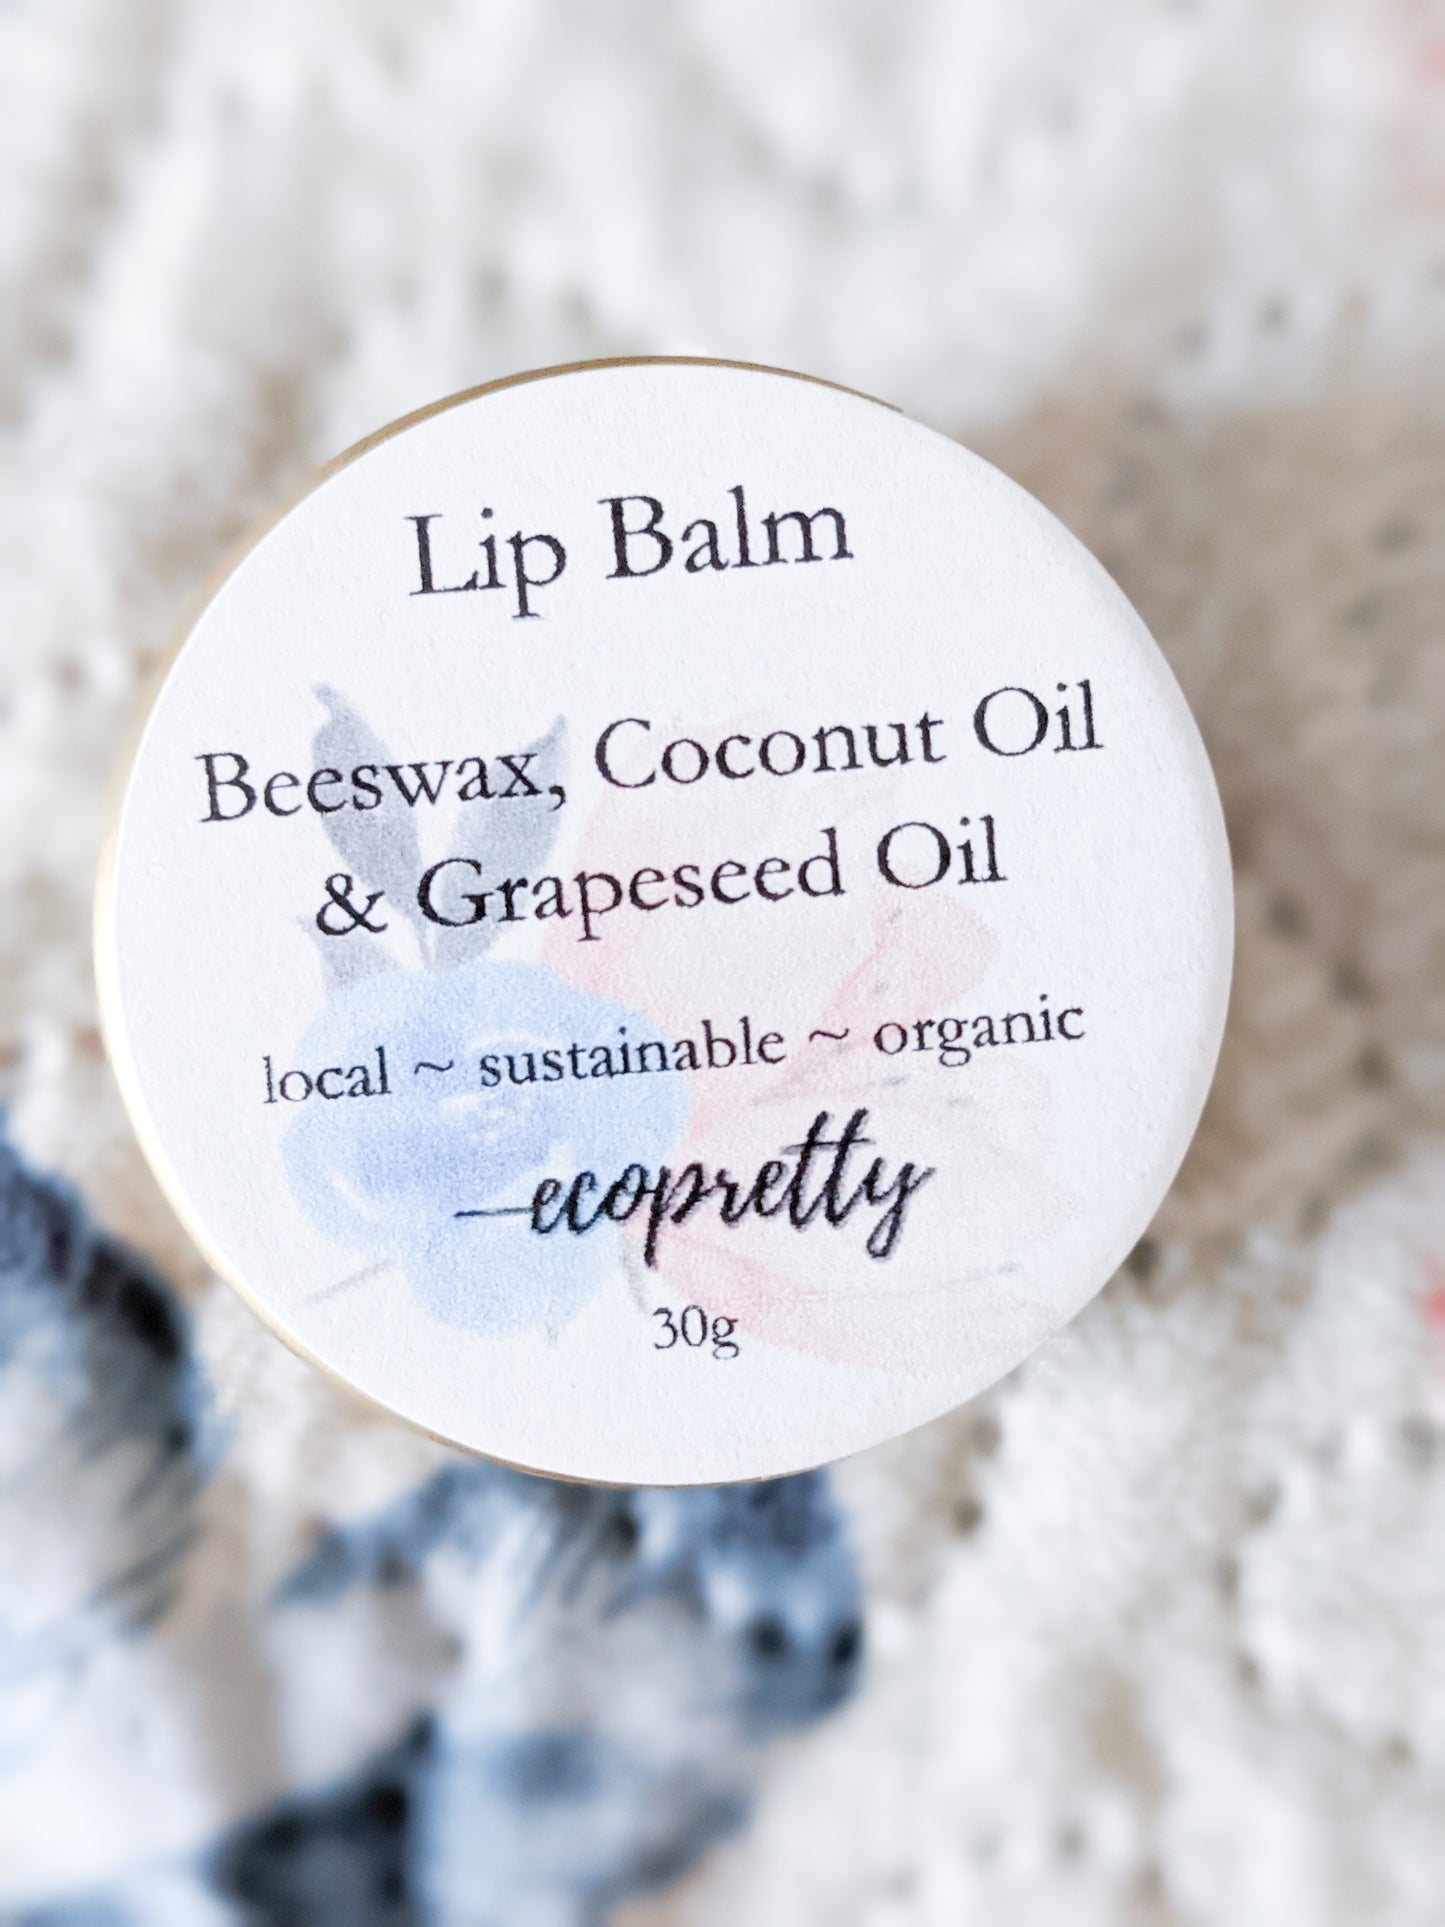 All-In-1 Cuticle Rescue / Lip Balm - Unscented & Natural